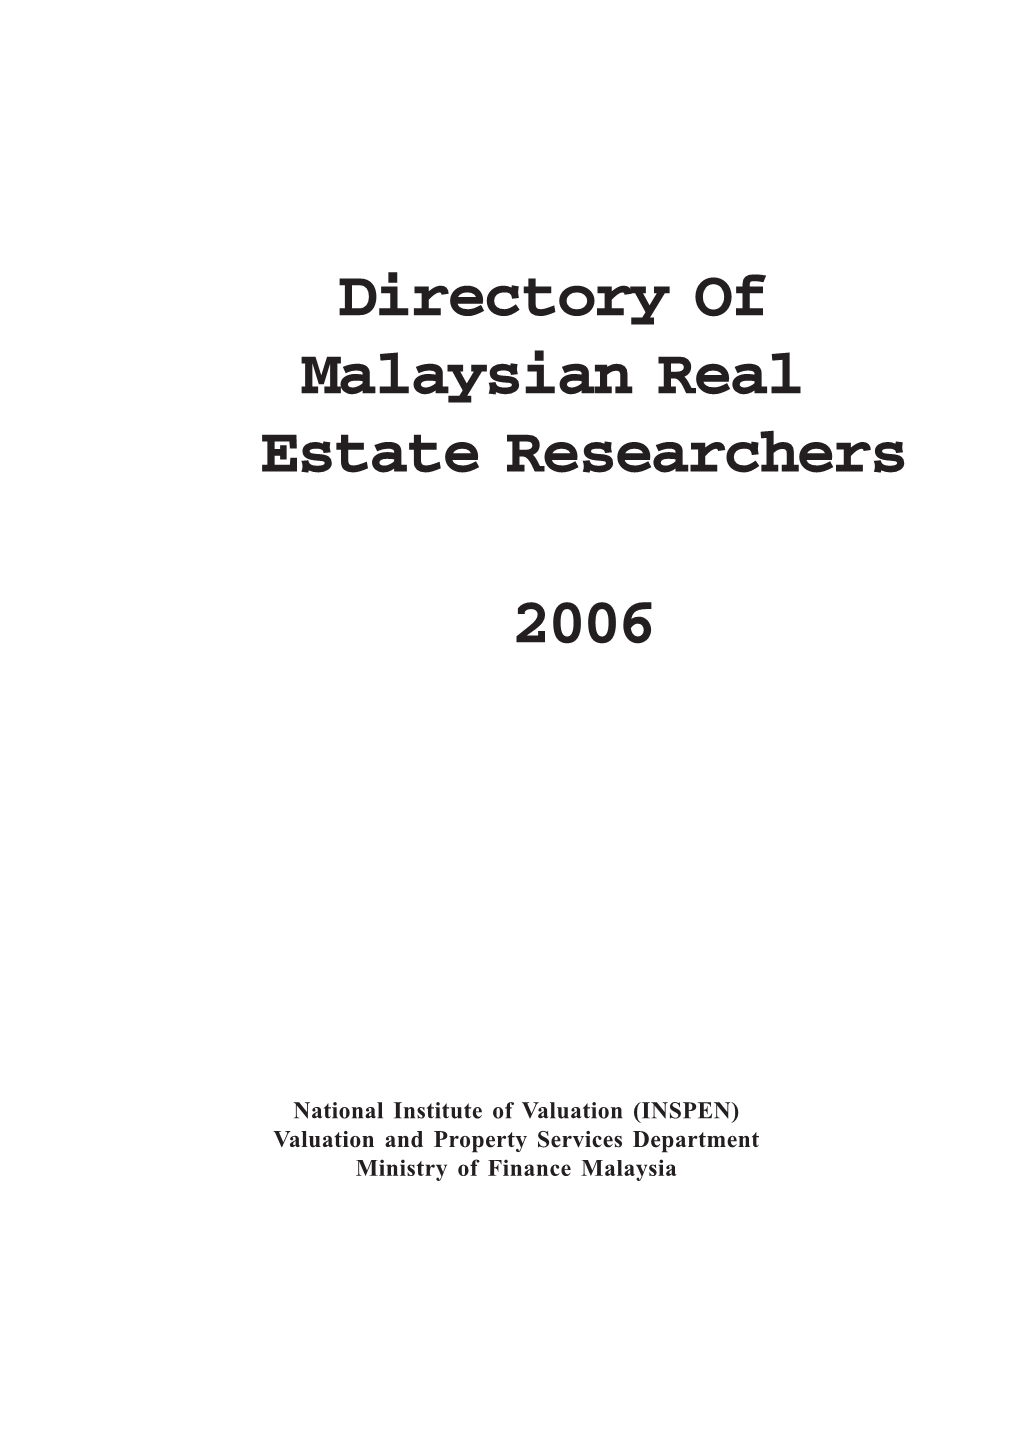 Directory of Malaysian Real Estate Researchers 2006 NAME of YEAR PARTICULARS of TITLE SEMINAR, CONFERENCE, PRESENTED/ RESEARCHER COURSE/NAME PUBLISHED of PUBLICATION